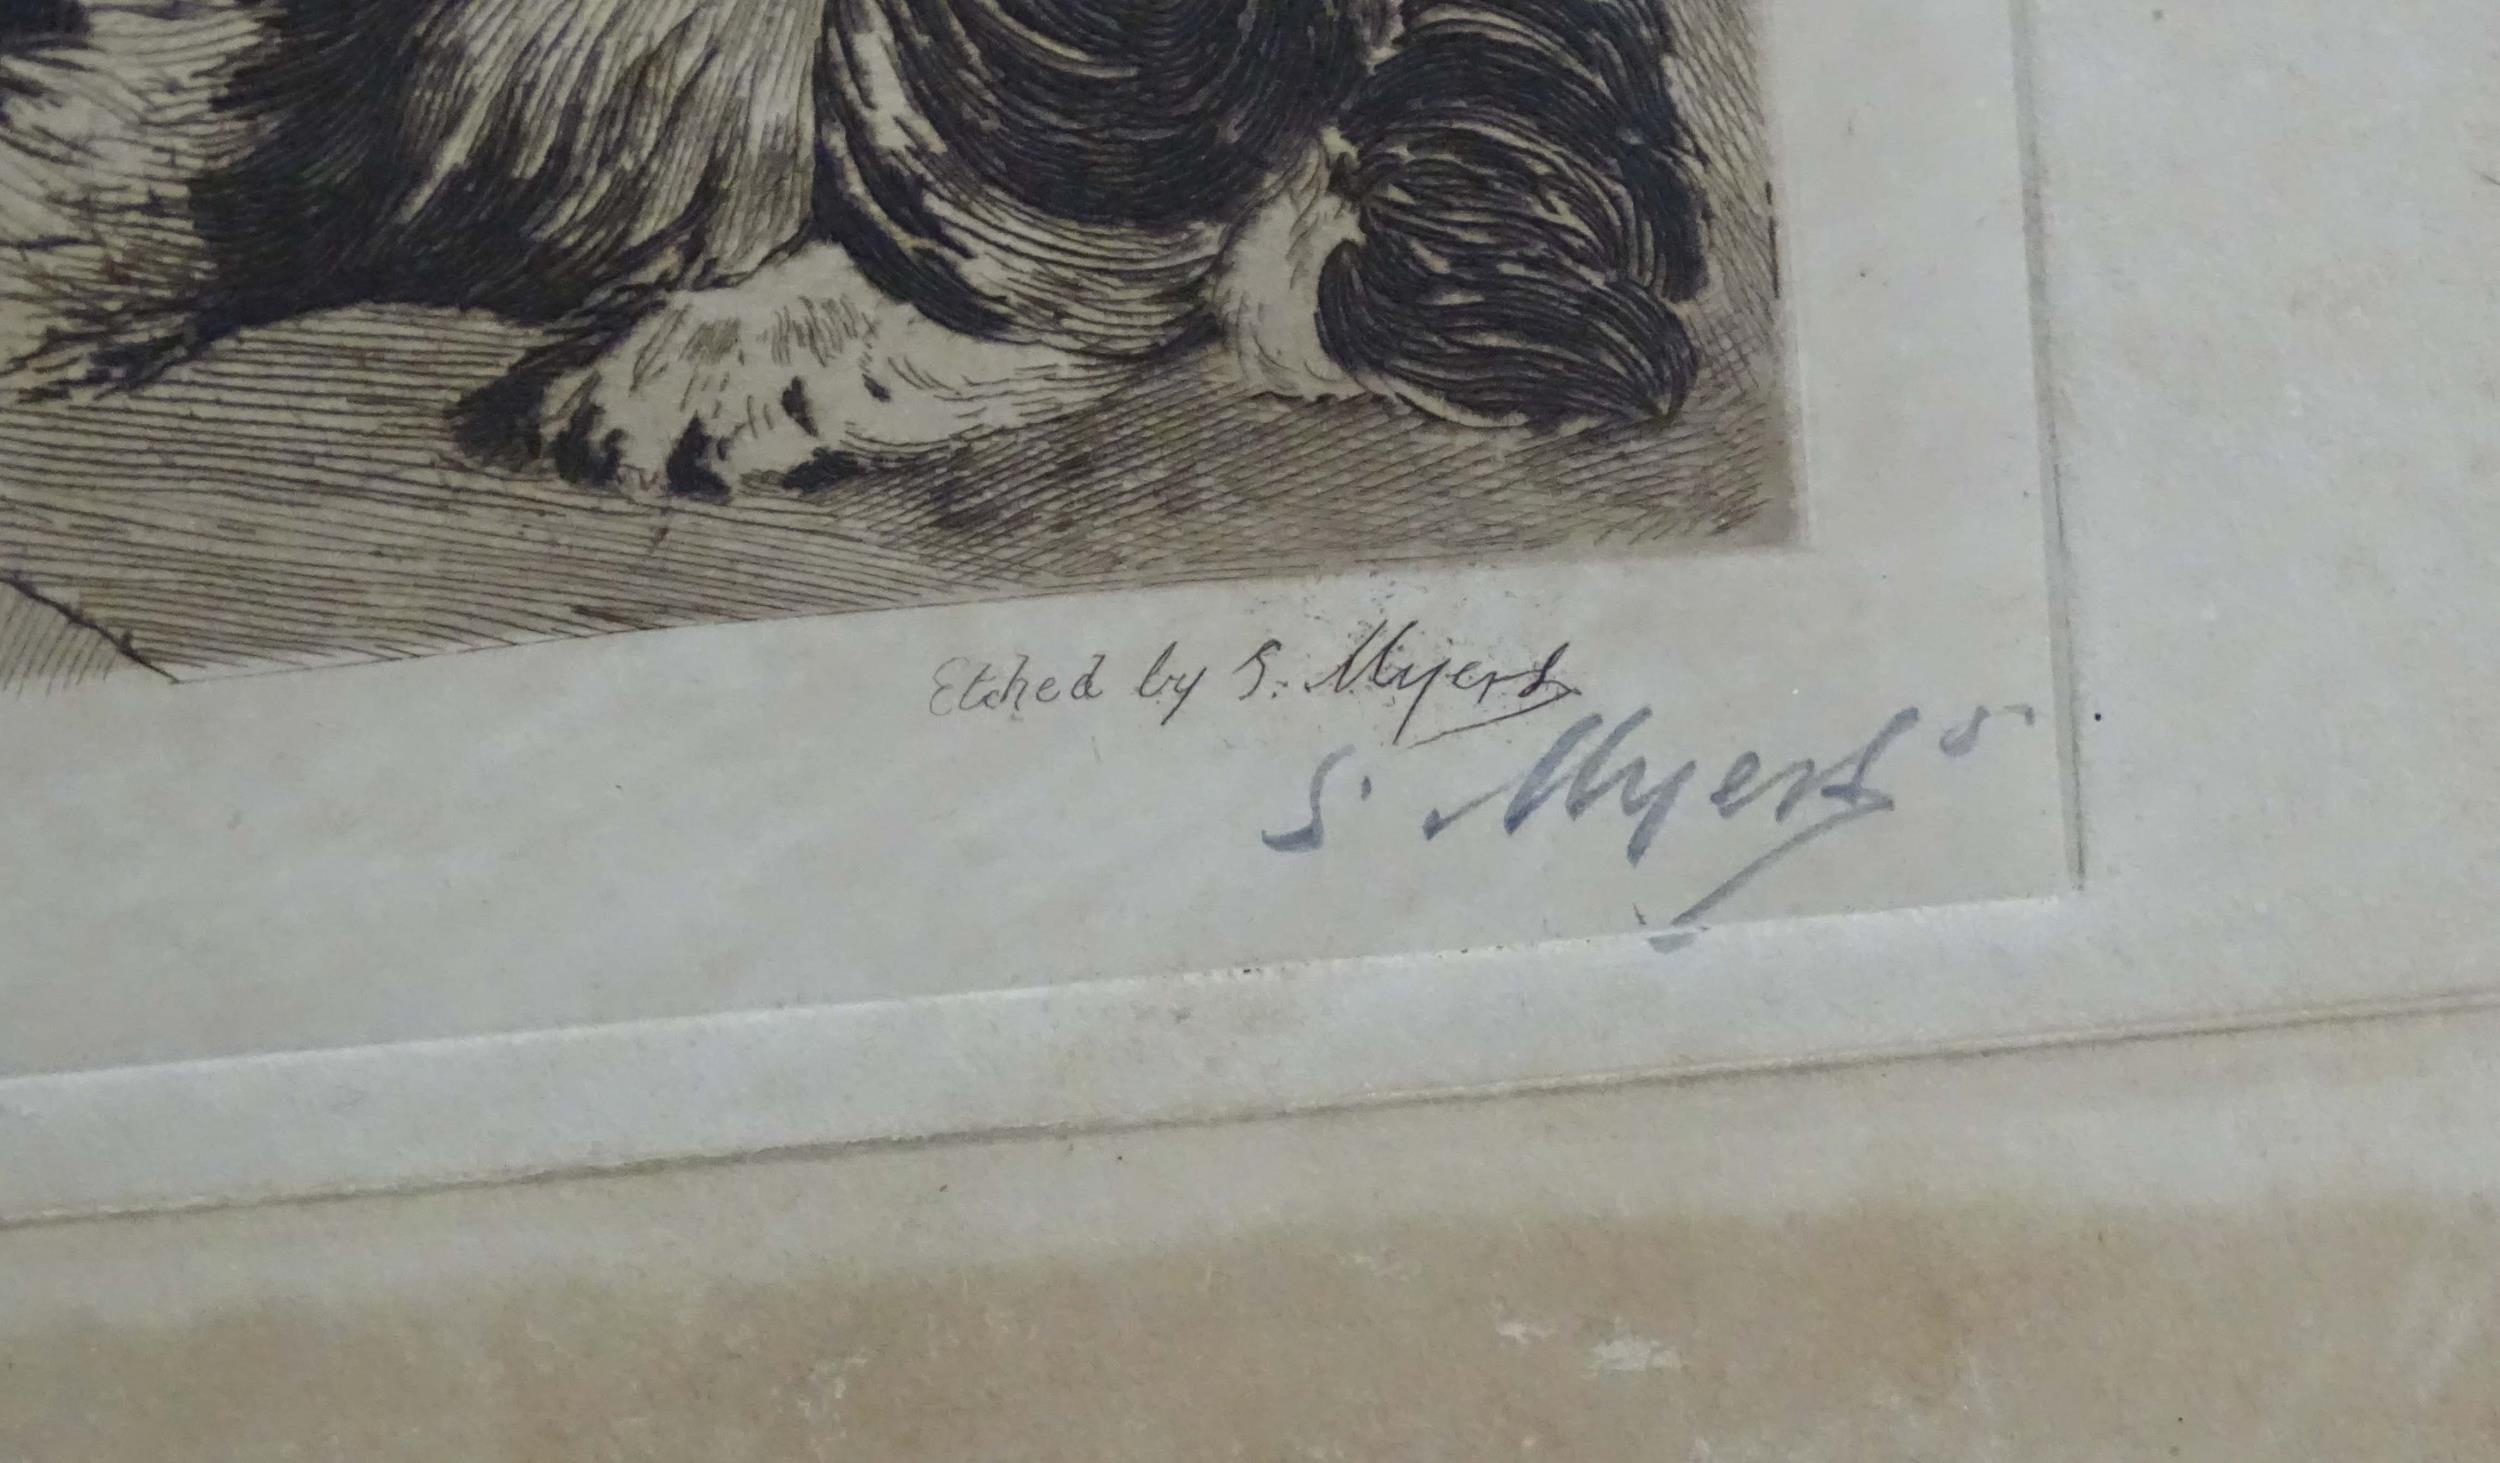 S. Myers after Sir Edwin Henry Landseer (1807-1873), 19th century, Four etchings depicting dogs to - Image 19 of 20